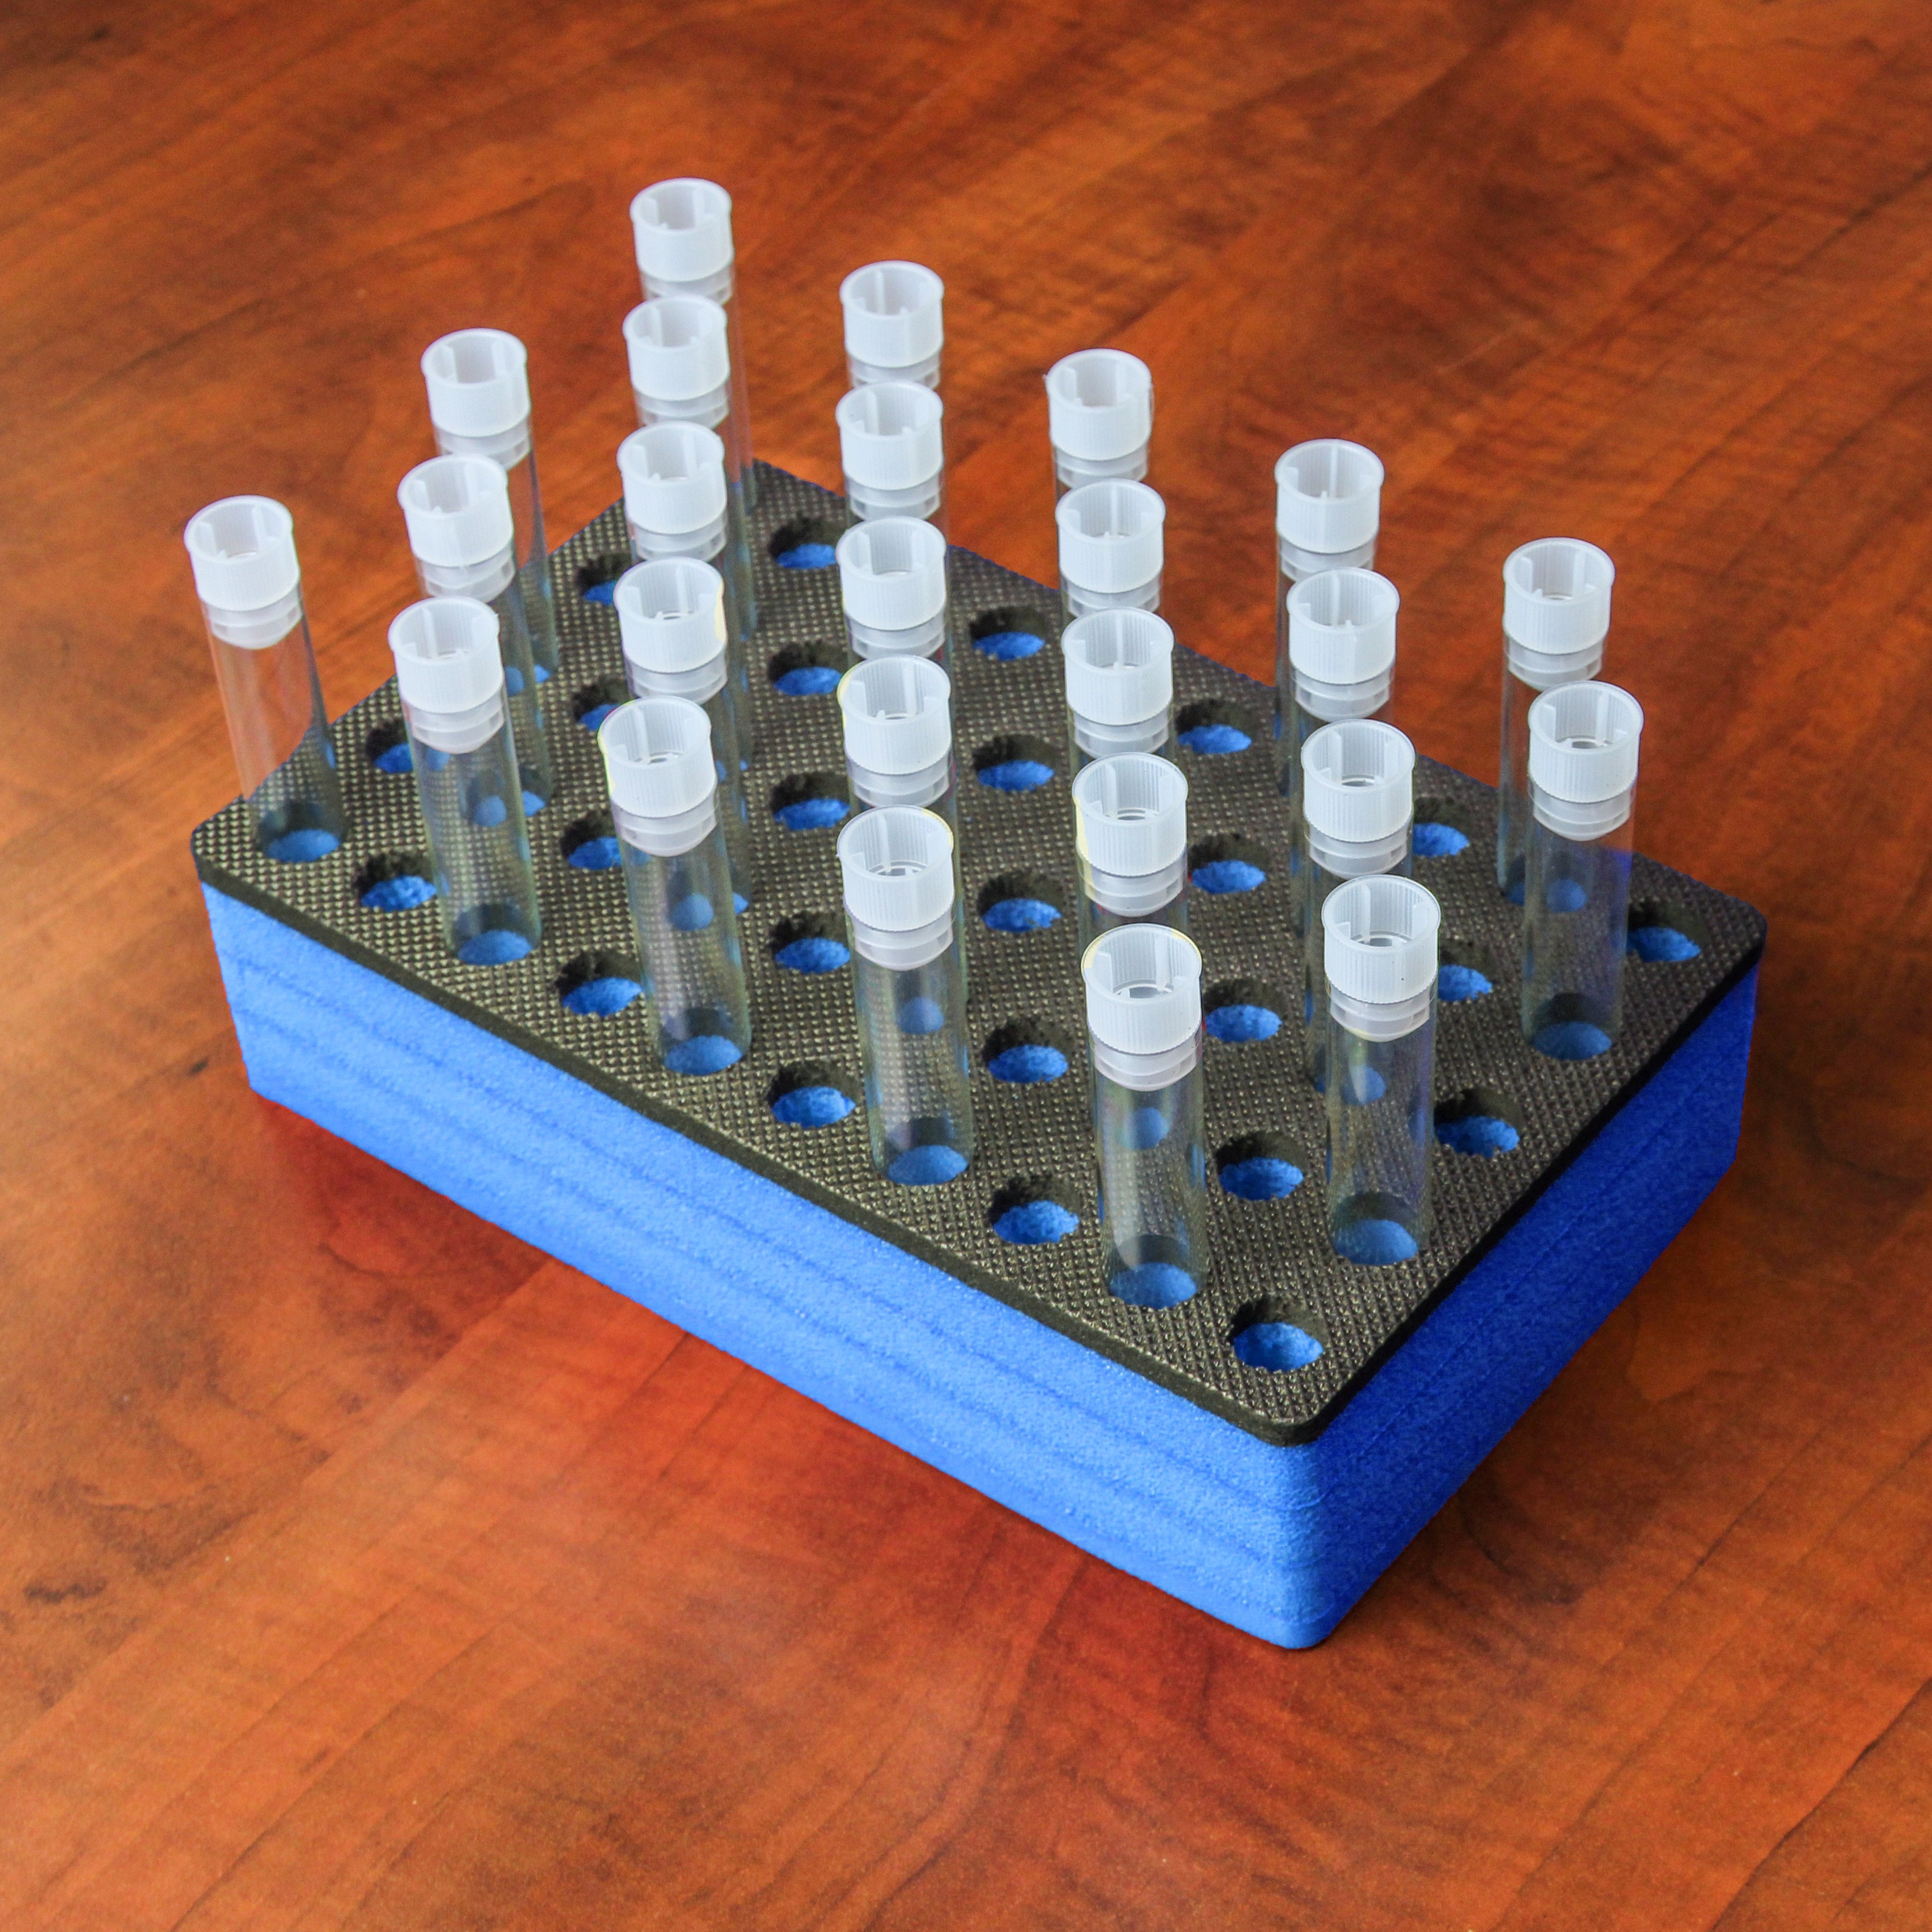 Polar Whale Test Tube Rack Blue and Black Foam Storage Rack Organizer Stand Transport Holds 50 Tubes Fits up to 15mm Diameter